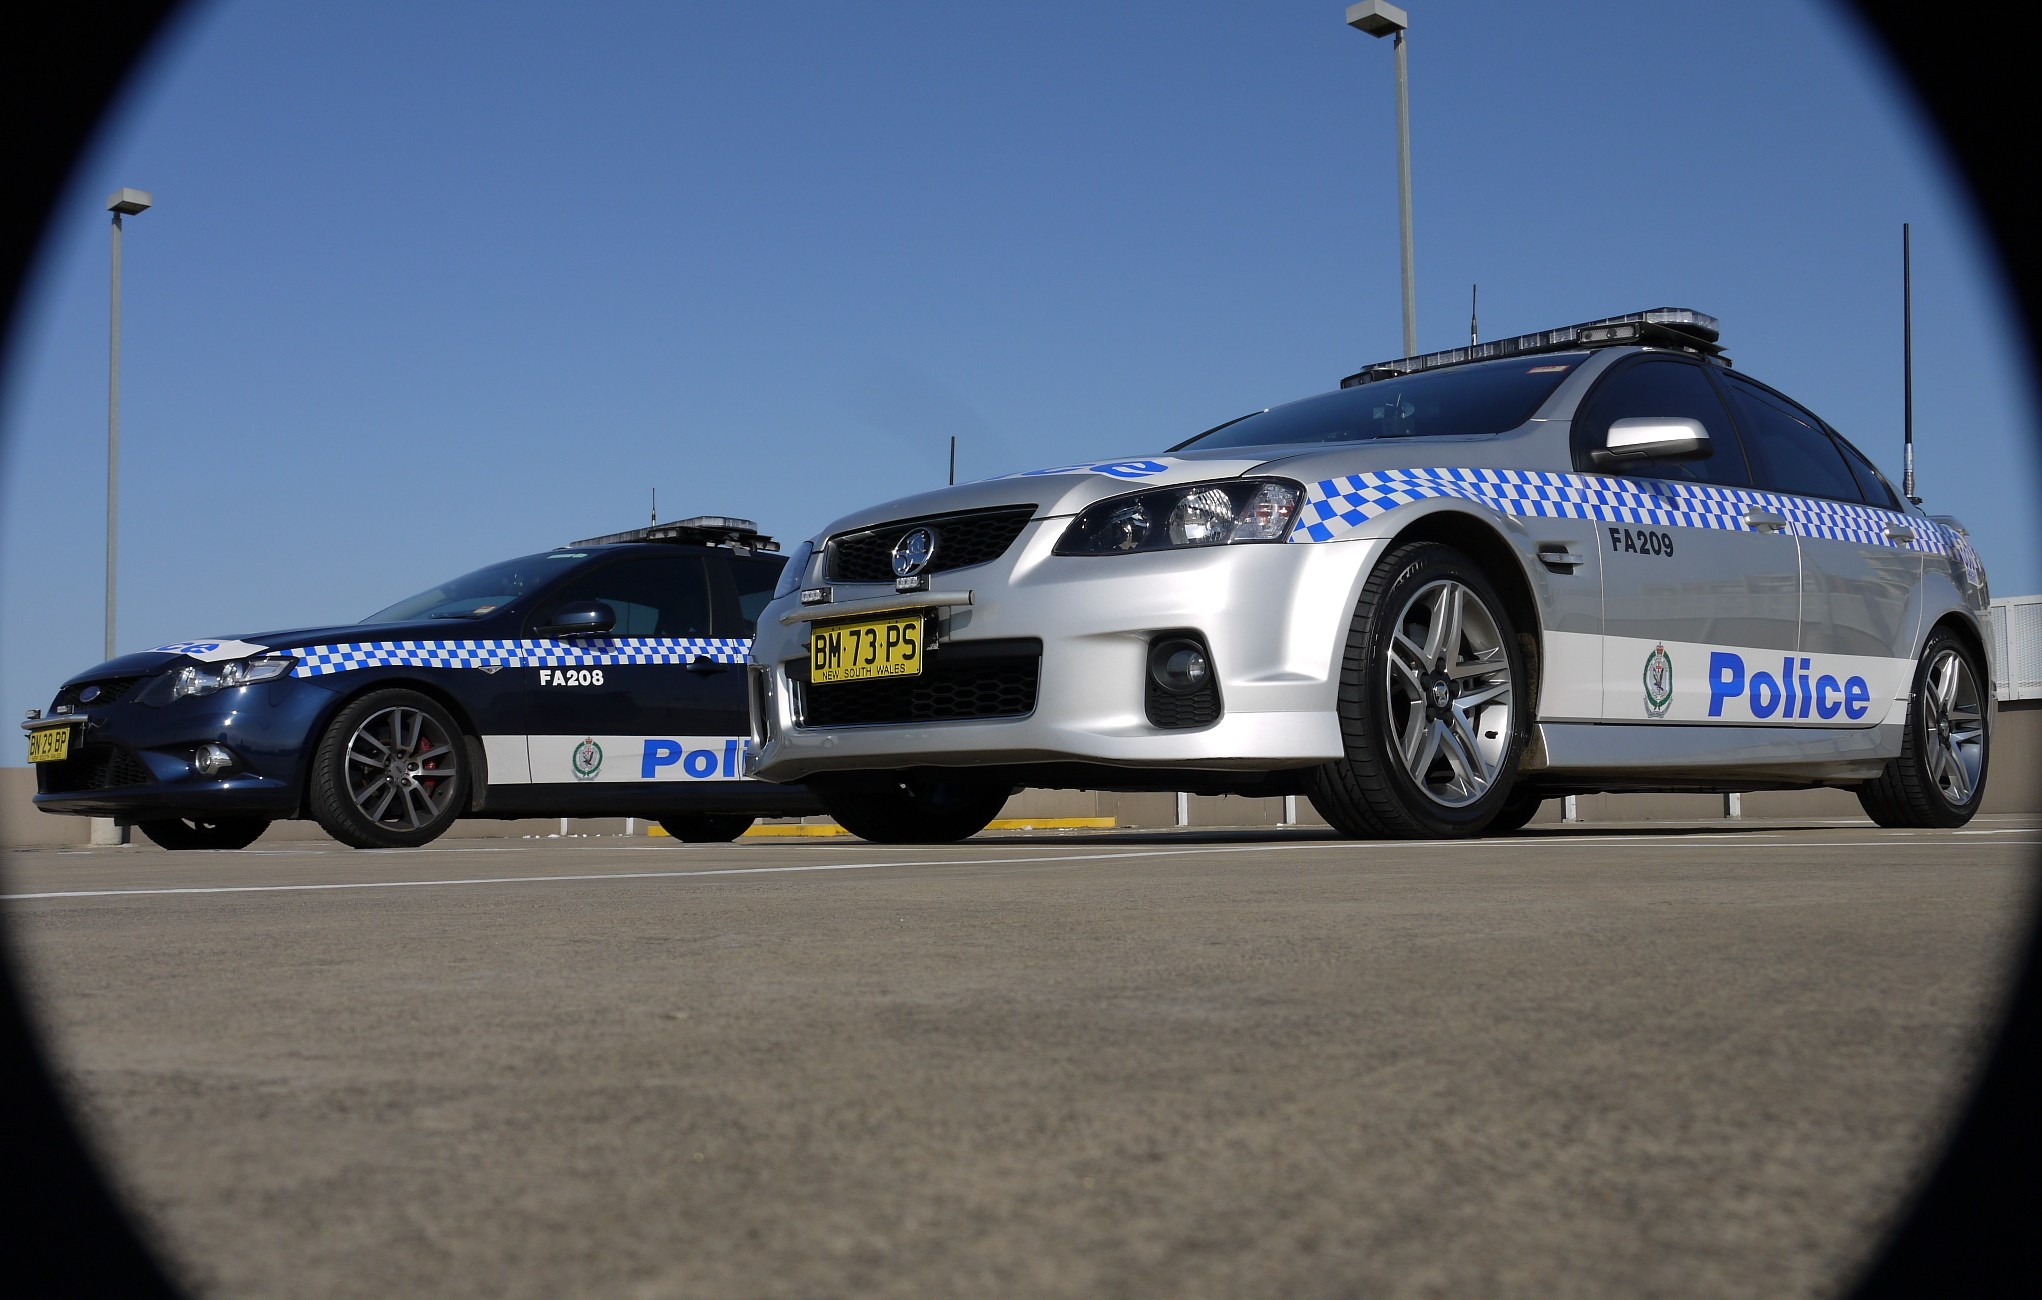 FA 208 Falcon XR6T ^ Fa 209 Commodore SS - Flickr - Highway Patrol Images